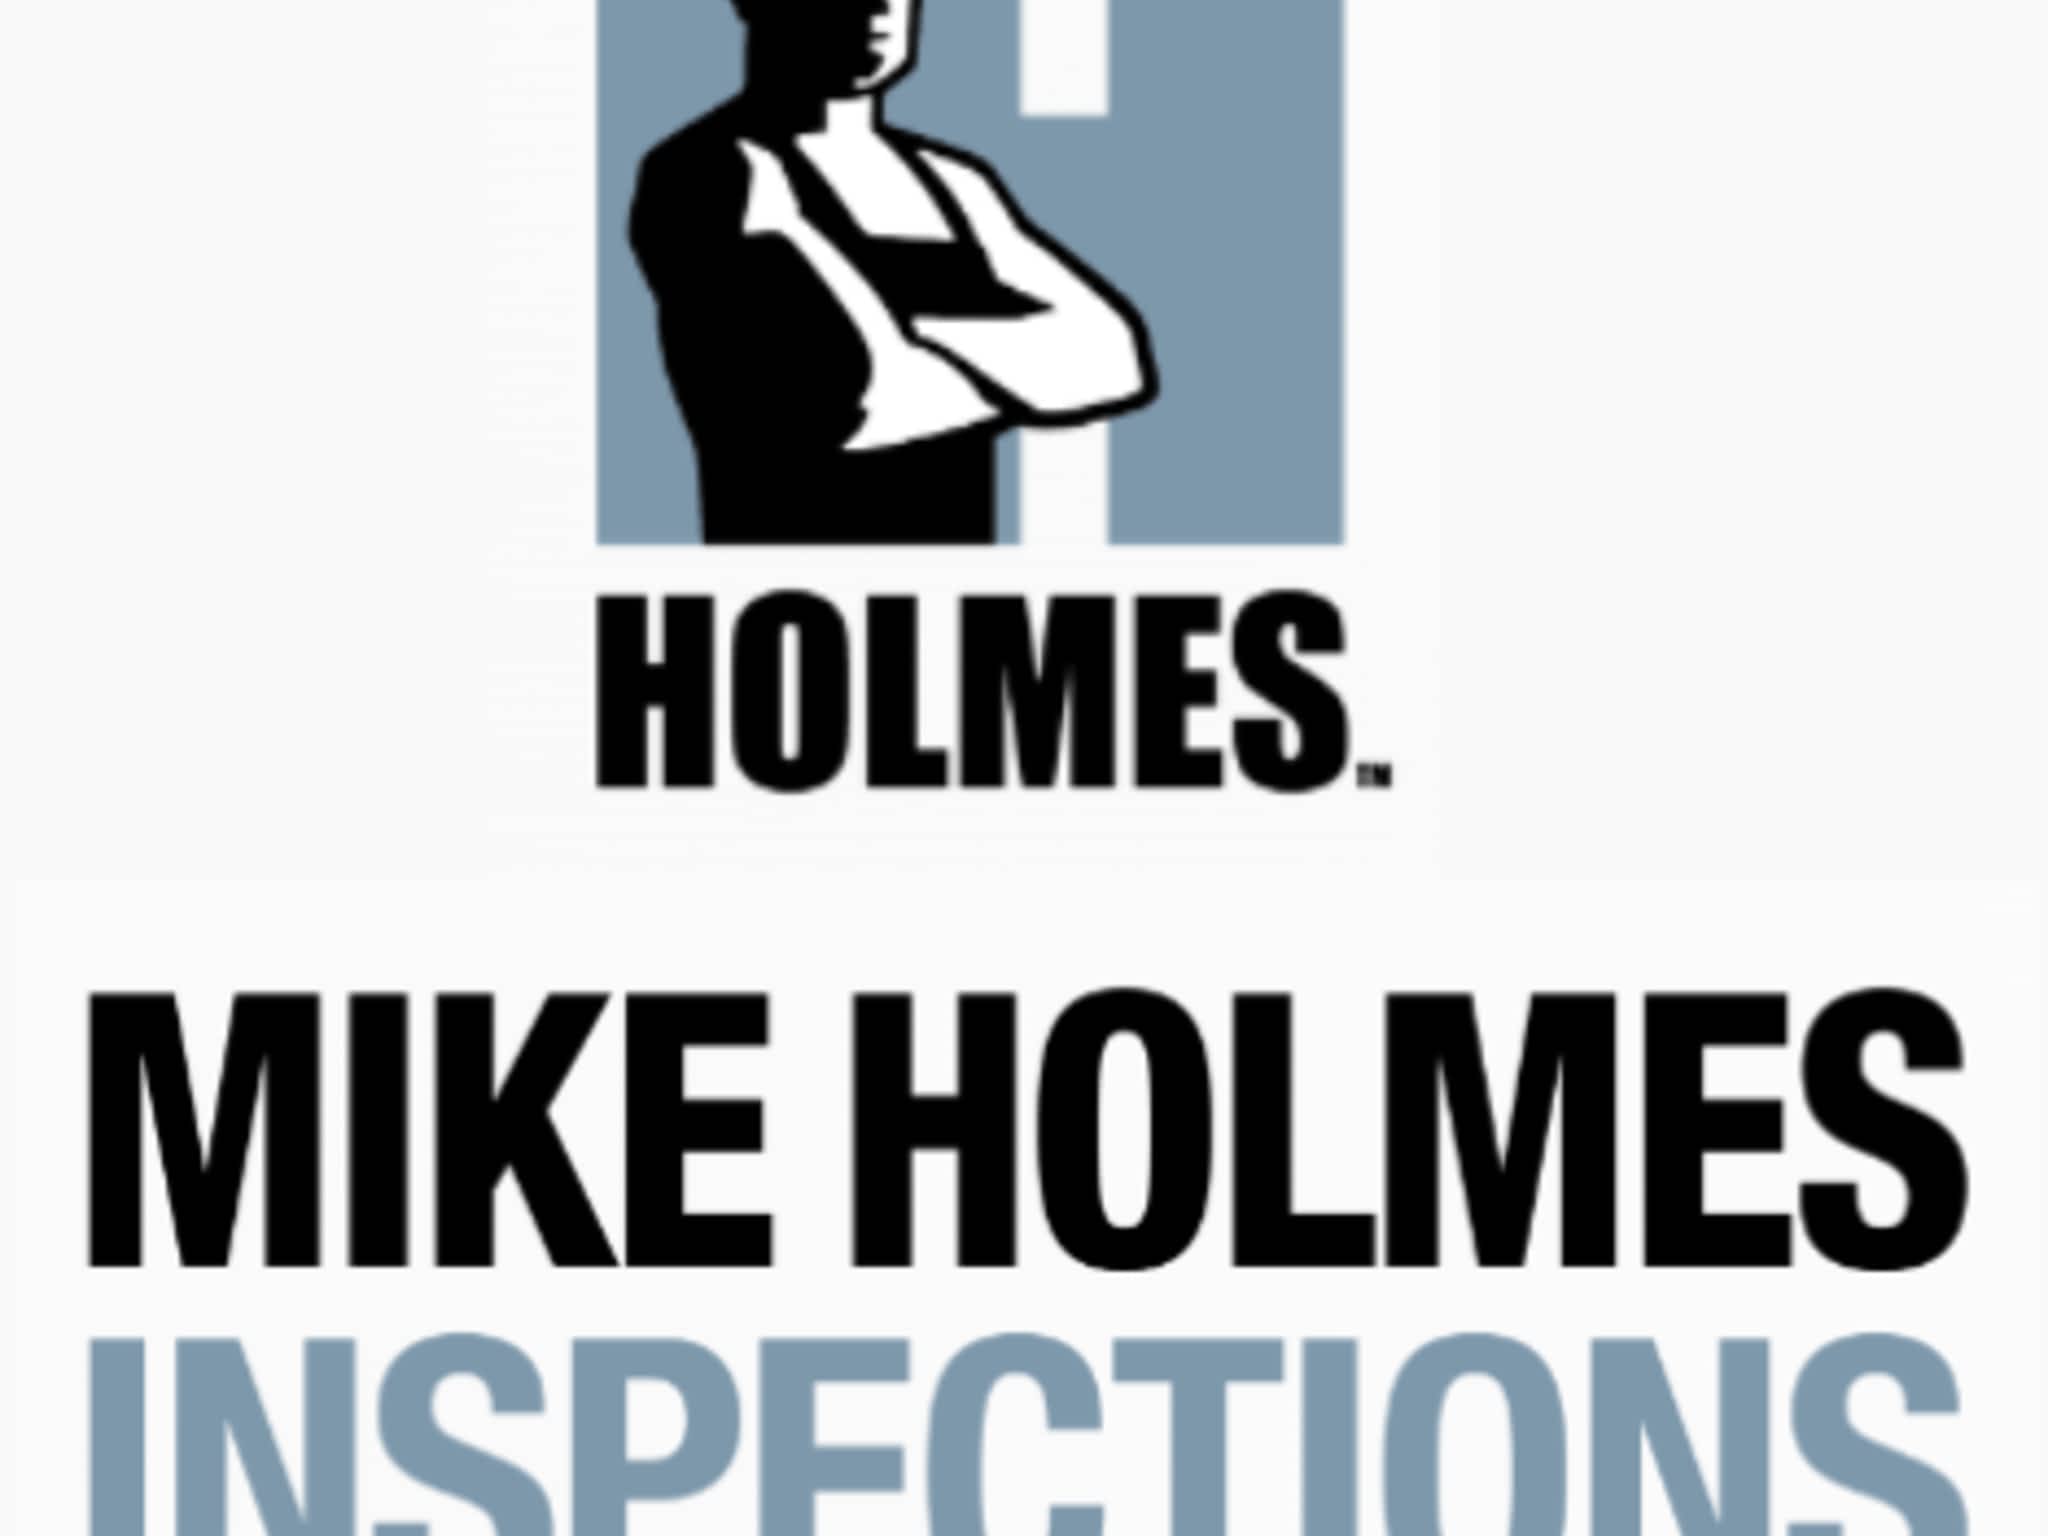 photo Mike Holmes Inspections - Greater Toronto Area